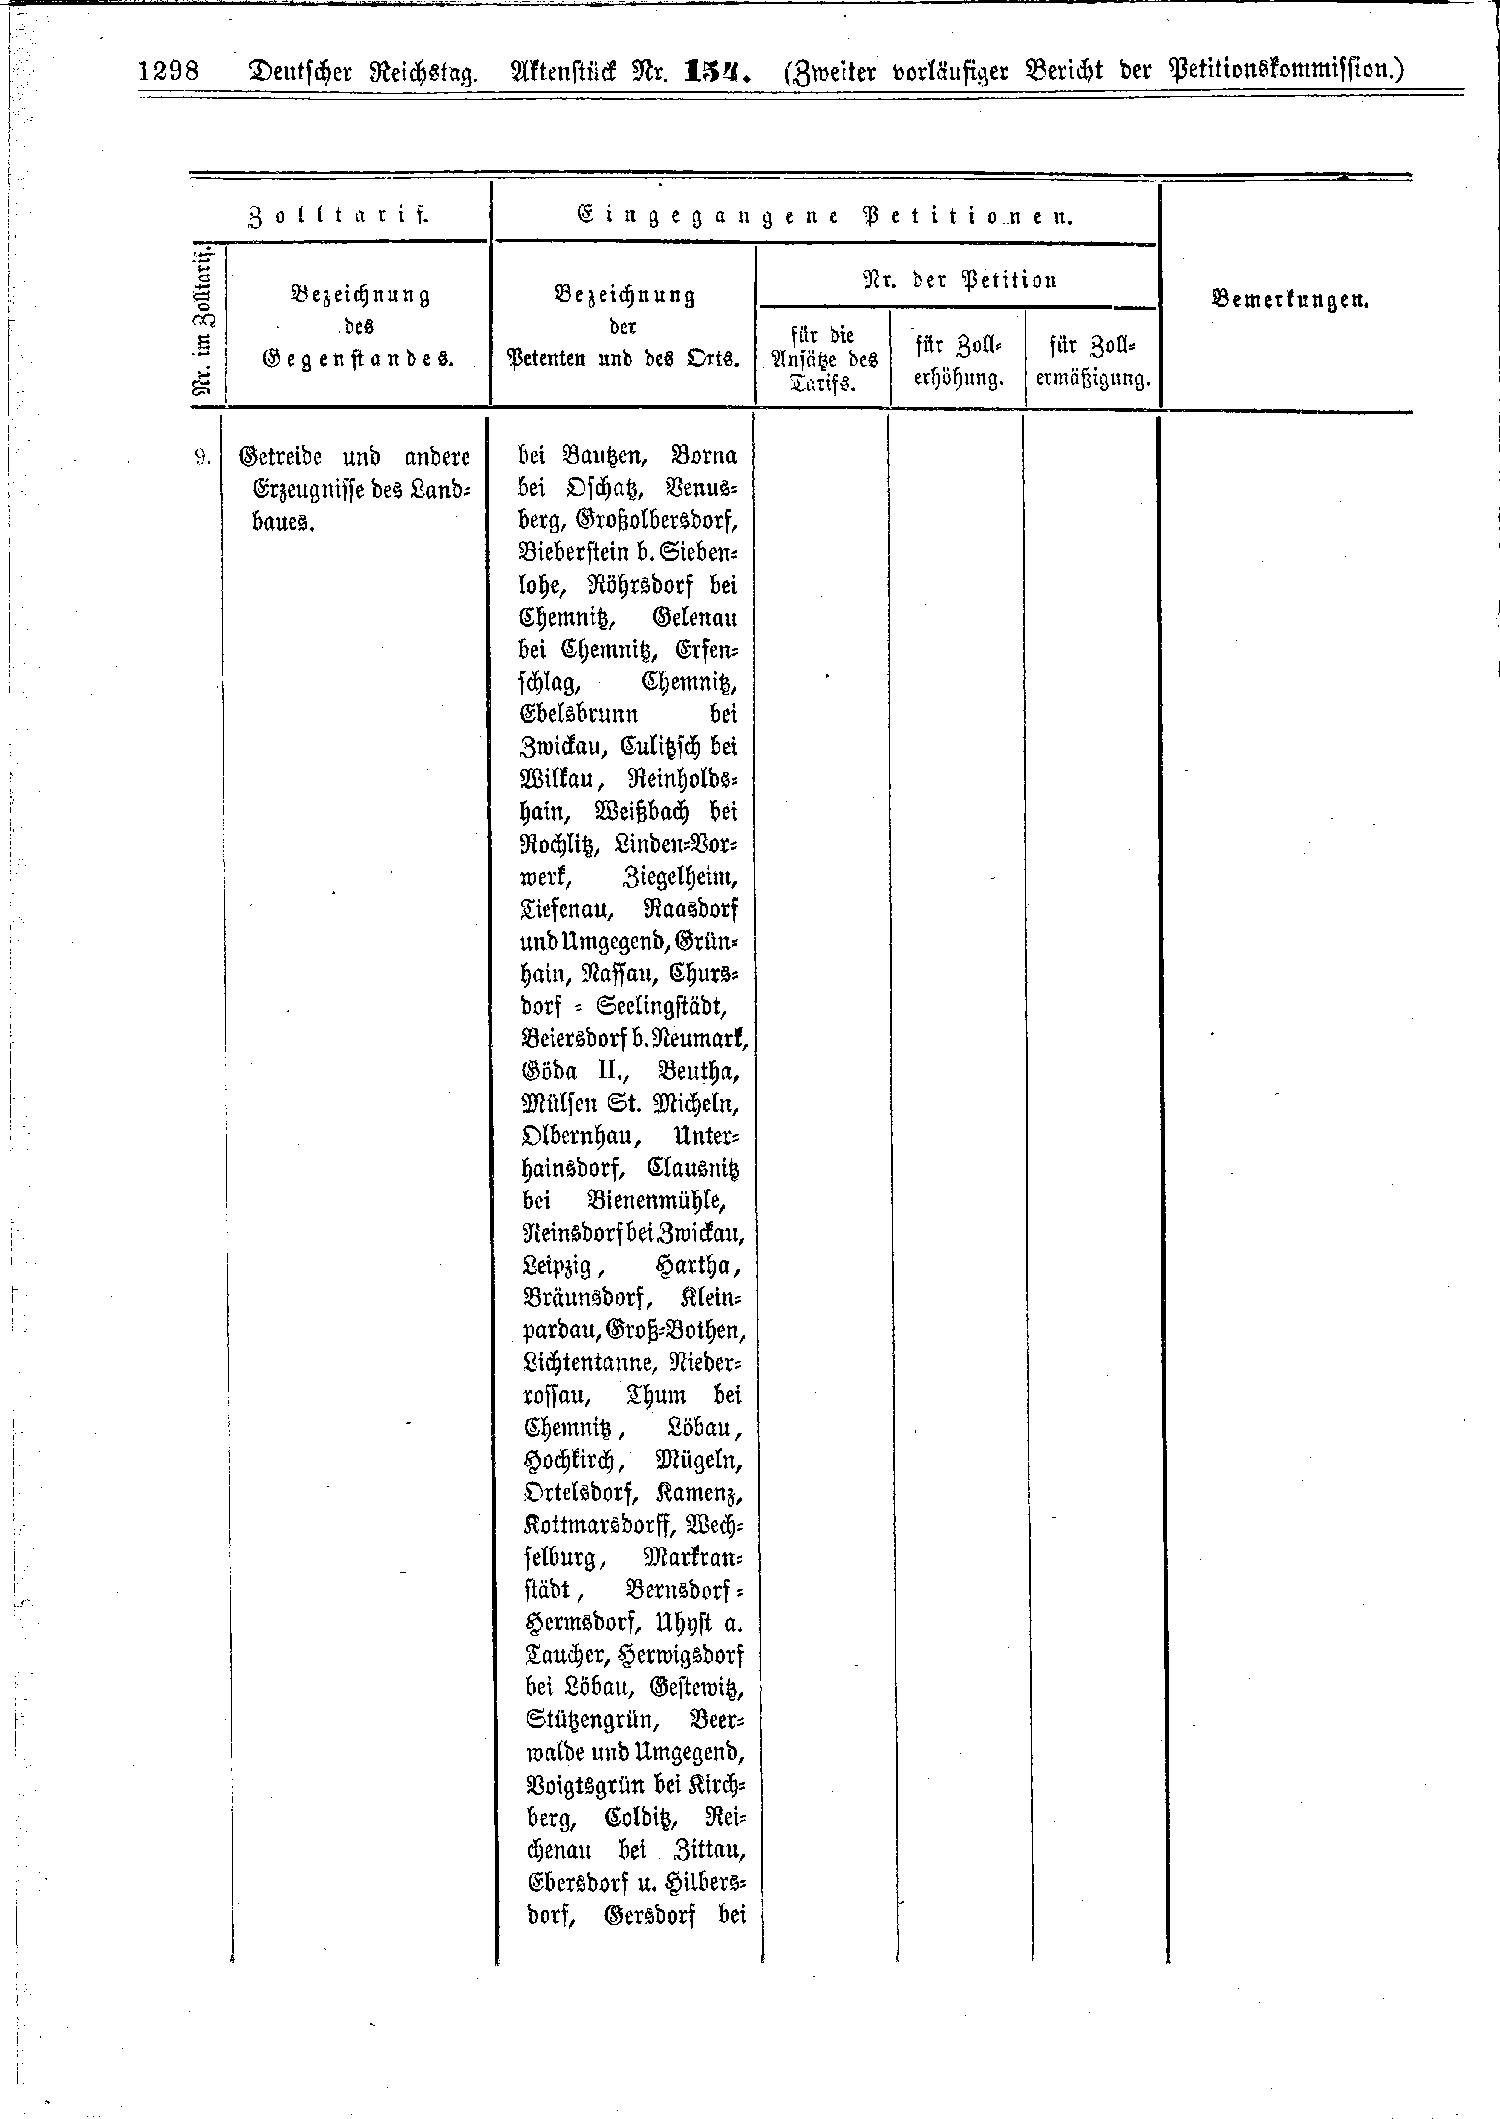 Scan of page 1298